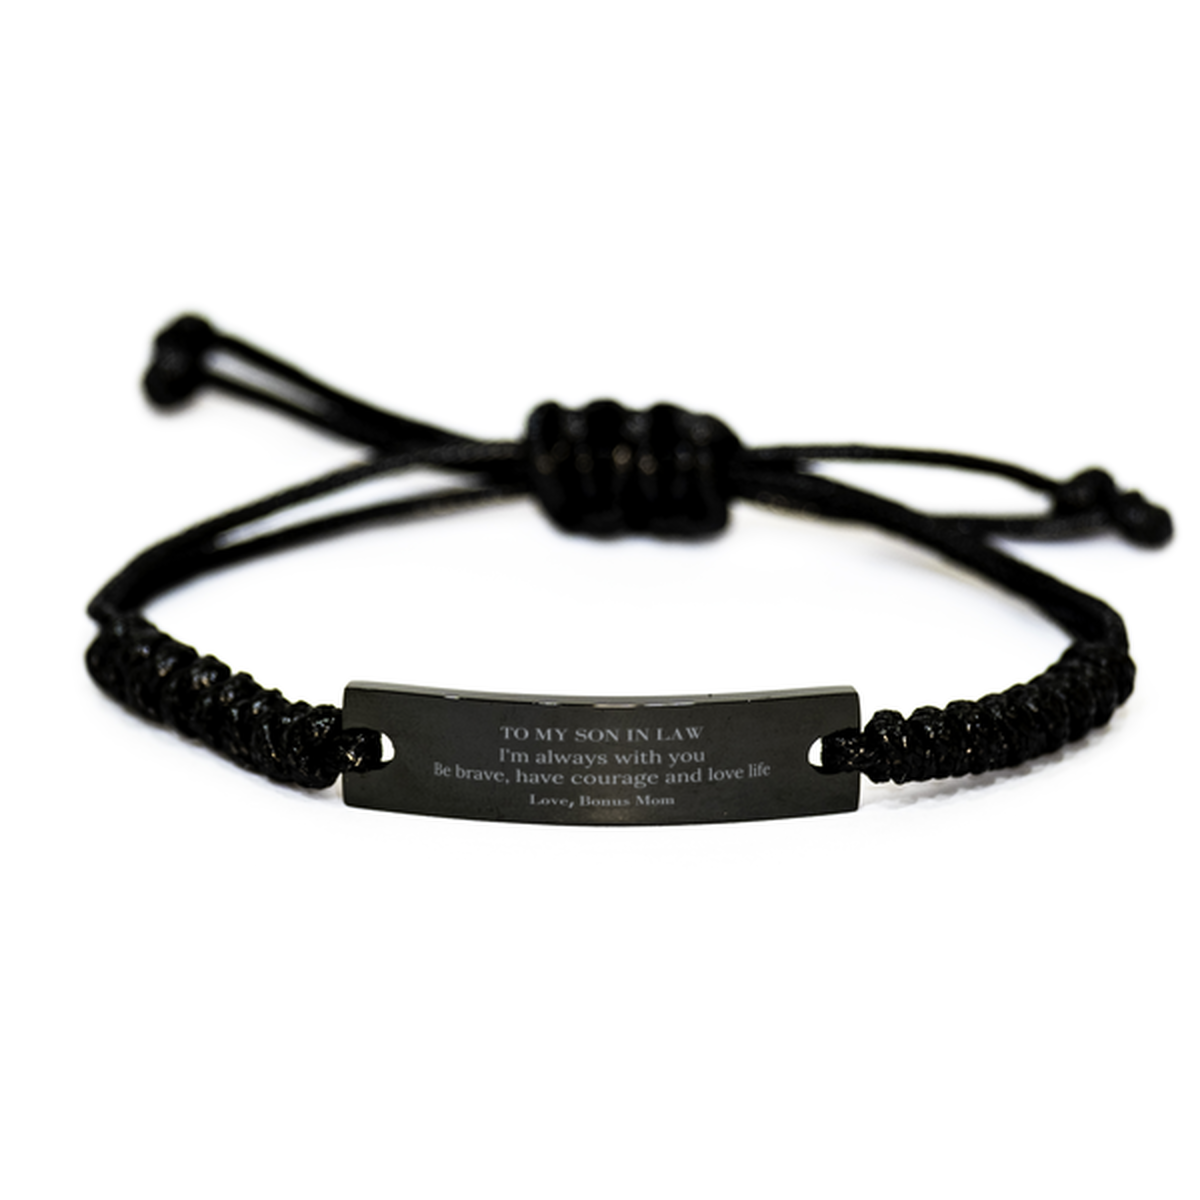 To My Son In Law Gifts from Bonus Mom, Unique Black Rope Bracelet Inspirational Christmas Birthday Graduation Gifts for Son In Law I'm always with you. Be brave, have courage and love life. Love, Bonus Mom